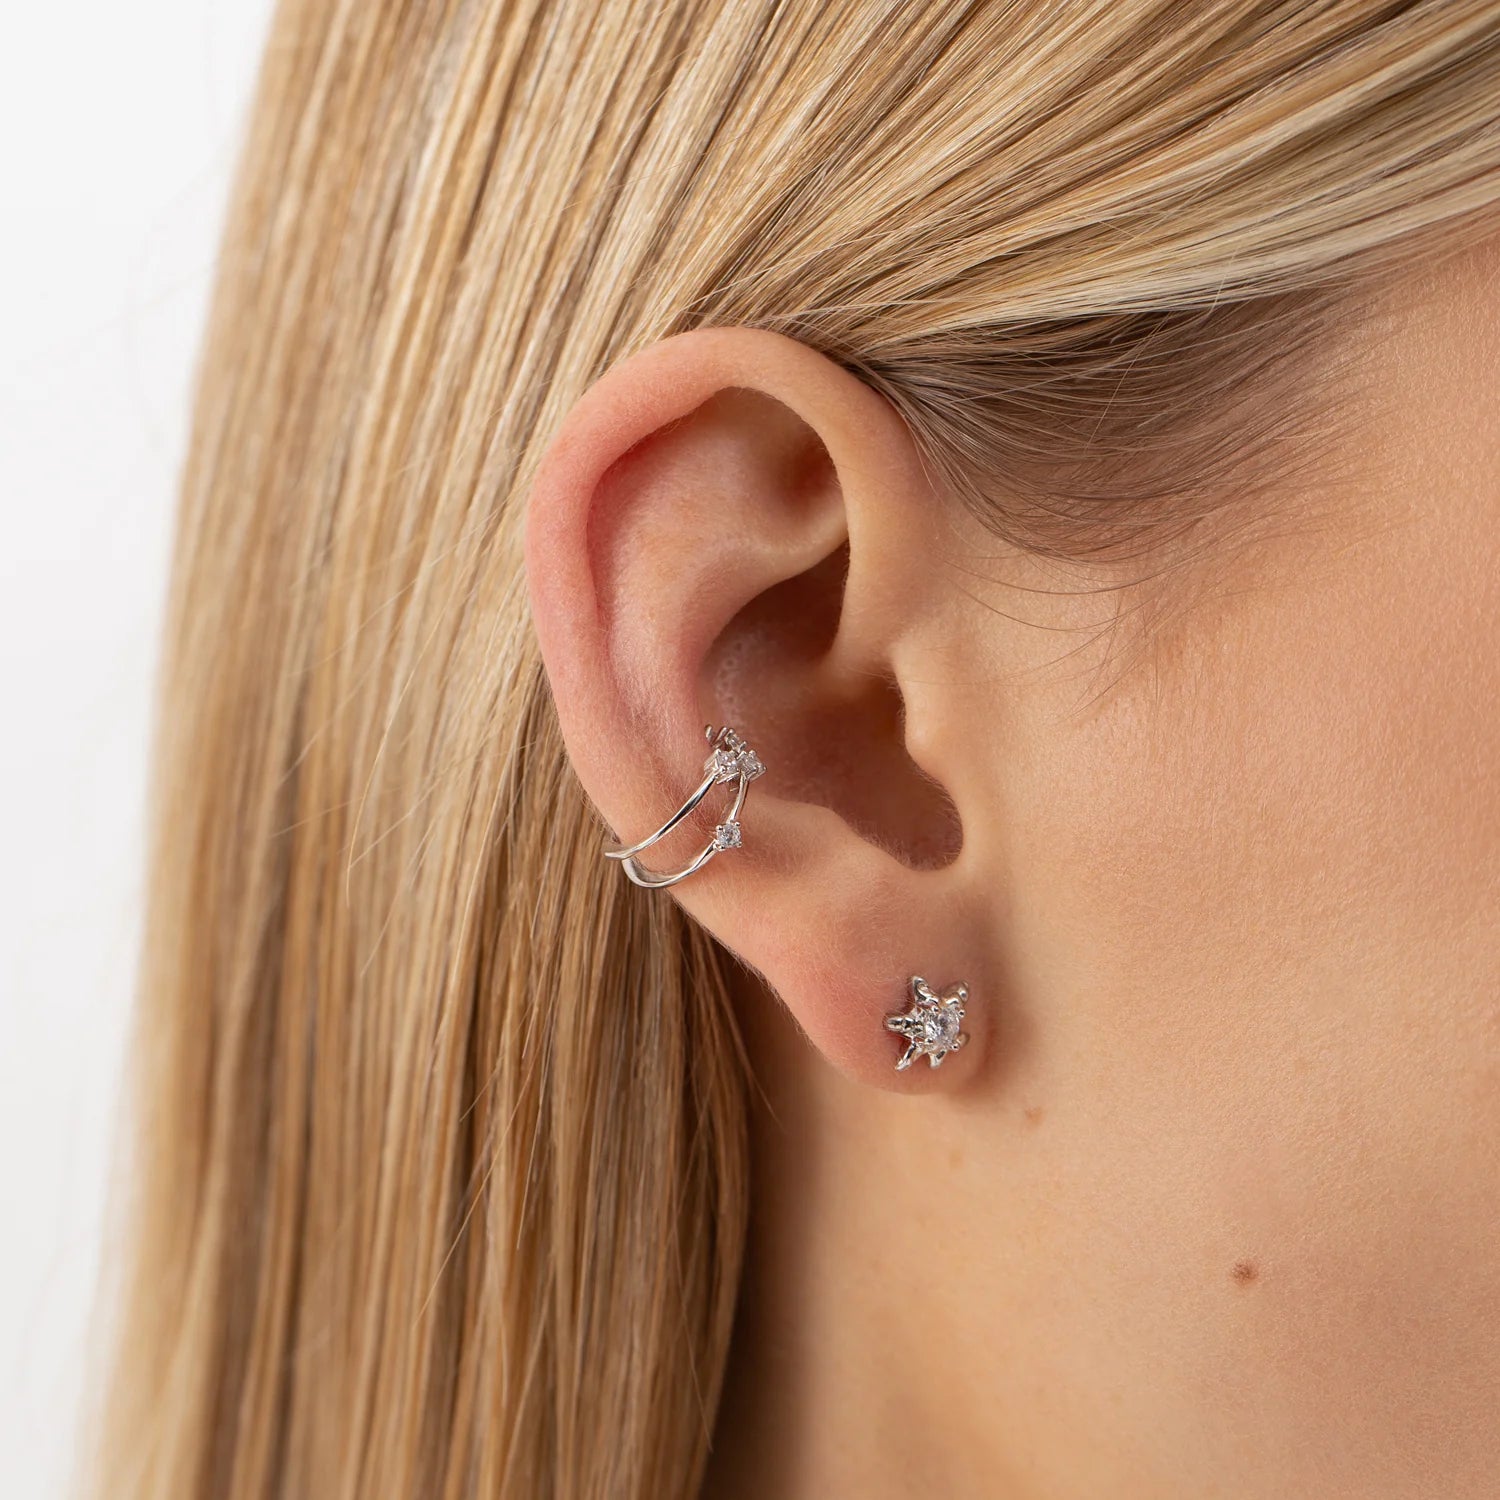 A close-up of a woman's ear adorned with a minimalist silver Single Ear Cuff ELYSIUM. Made from recycled silver, hypoallergenic, and elegant.